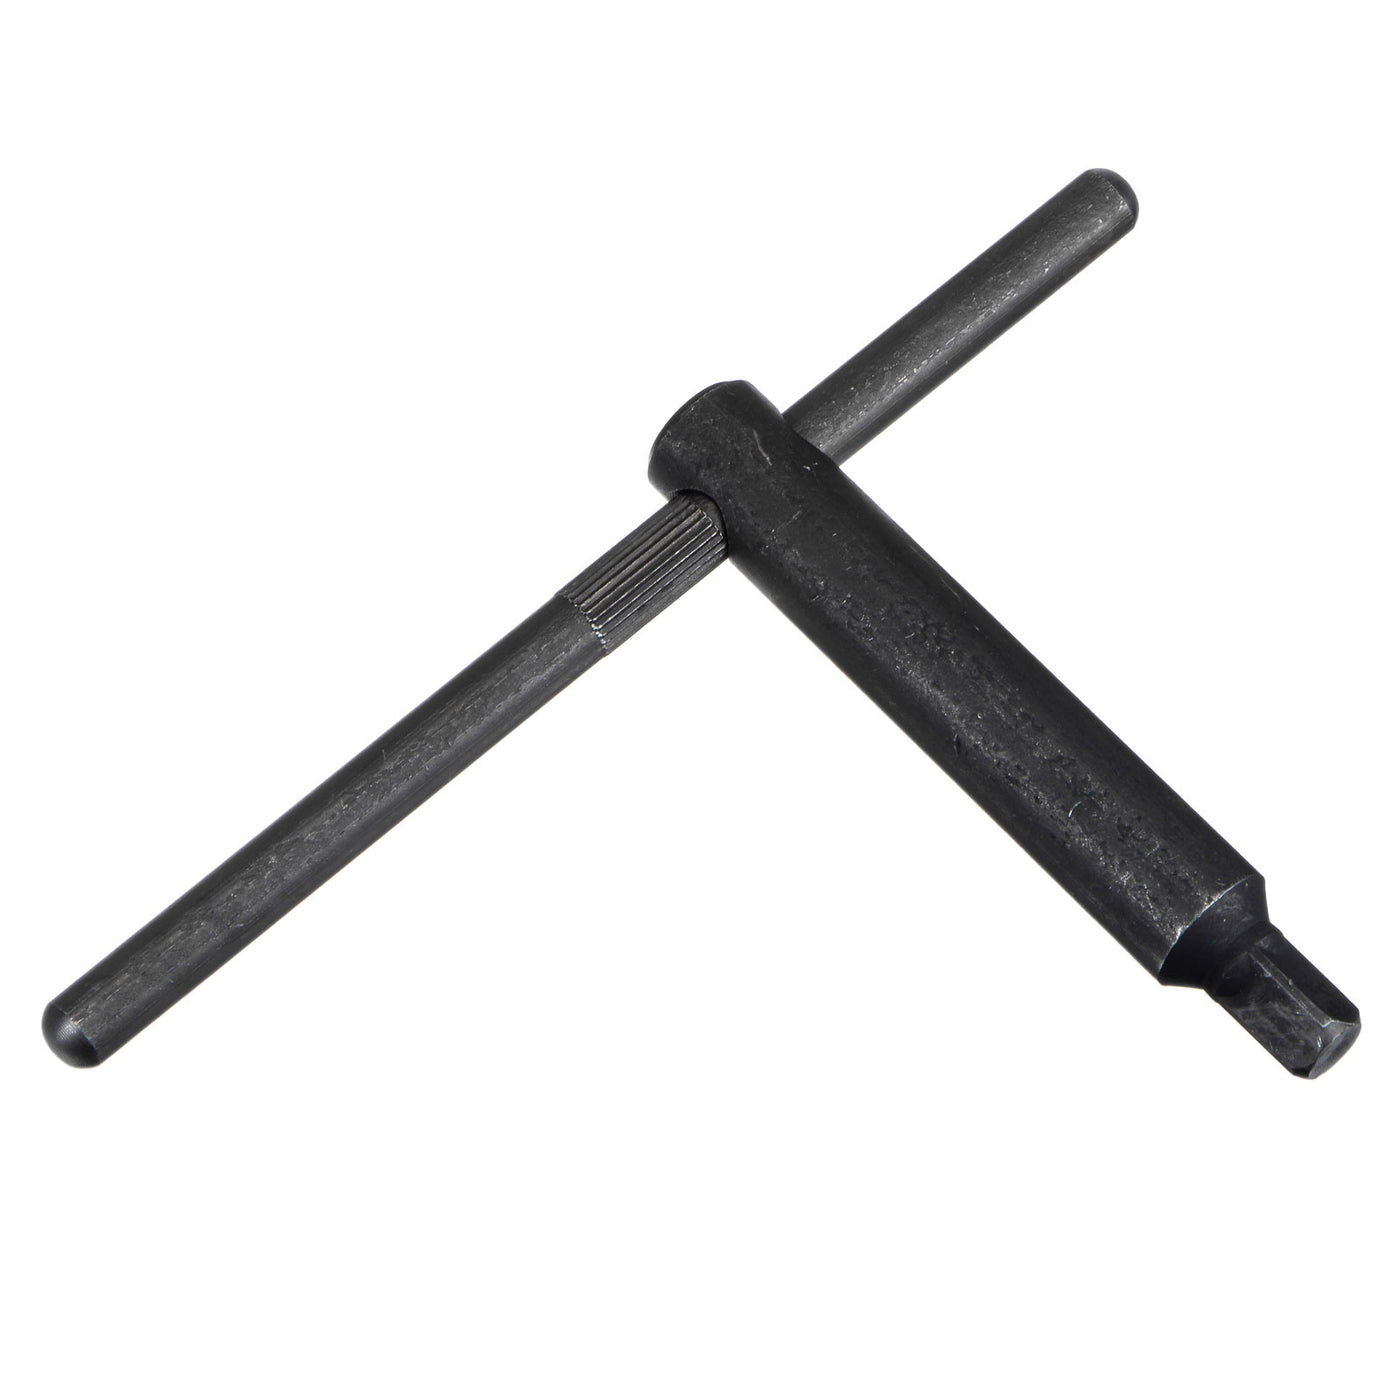 Uxcell Uxcell Lathe Chuck Wrench, 14mm Square Head Key Spanner Tool (L180x250mm)